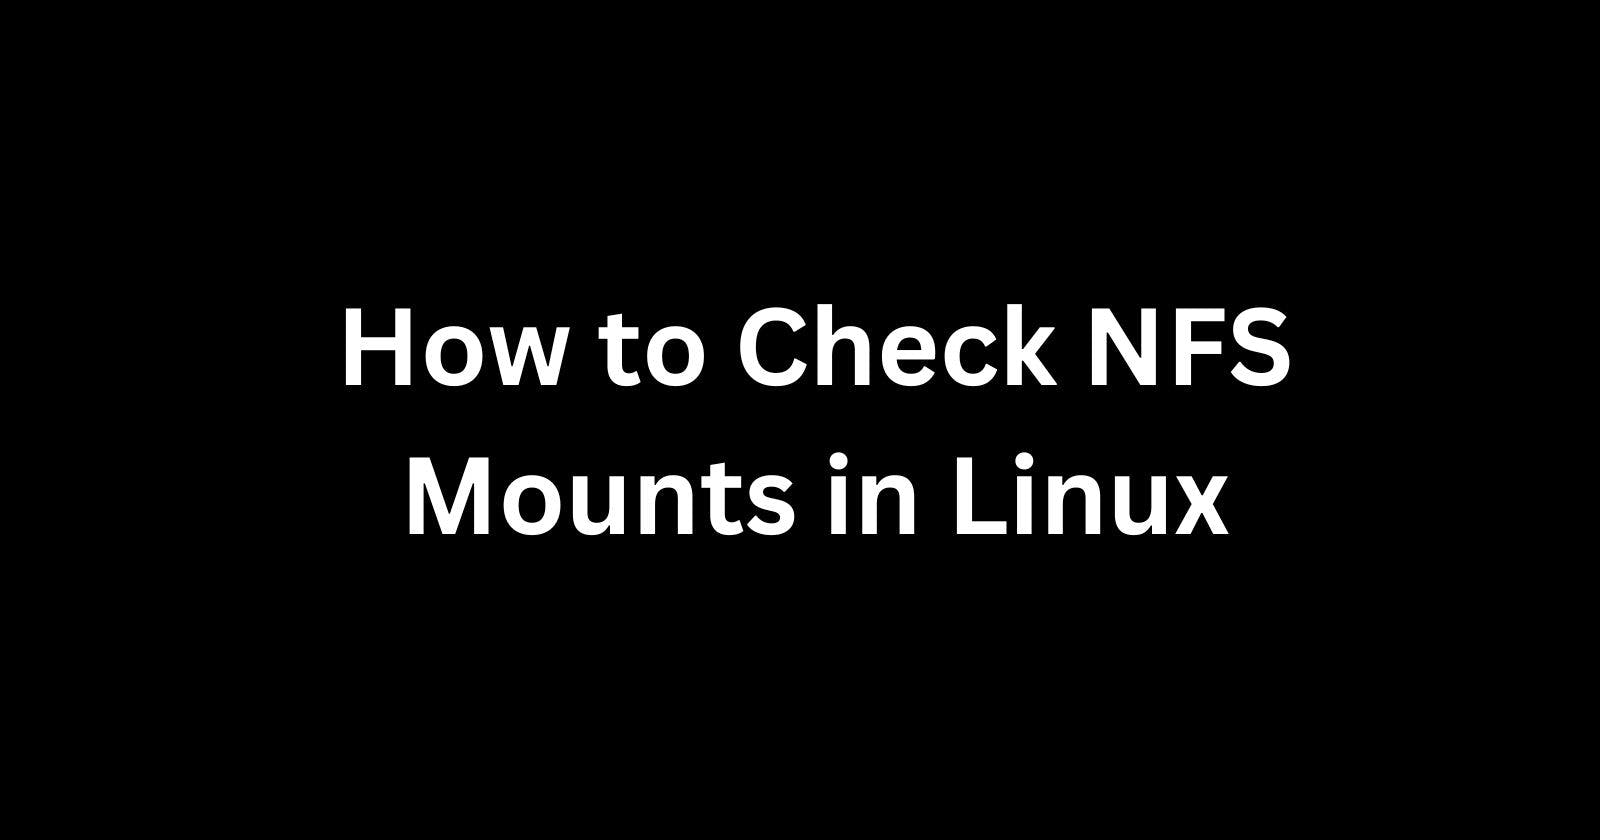 How to Check NFS Mounts in Linux